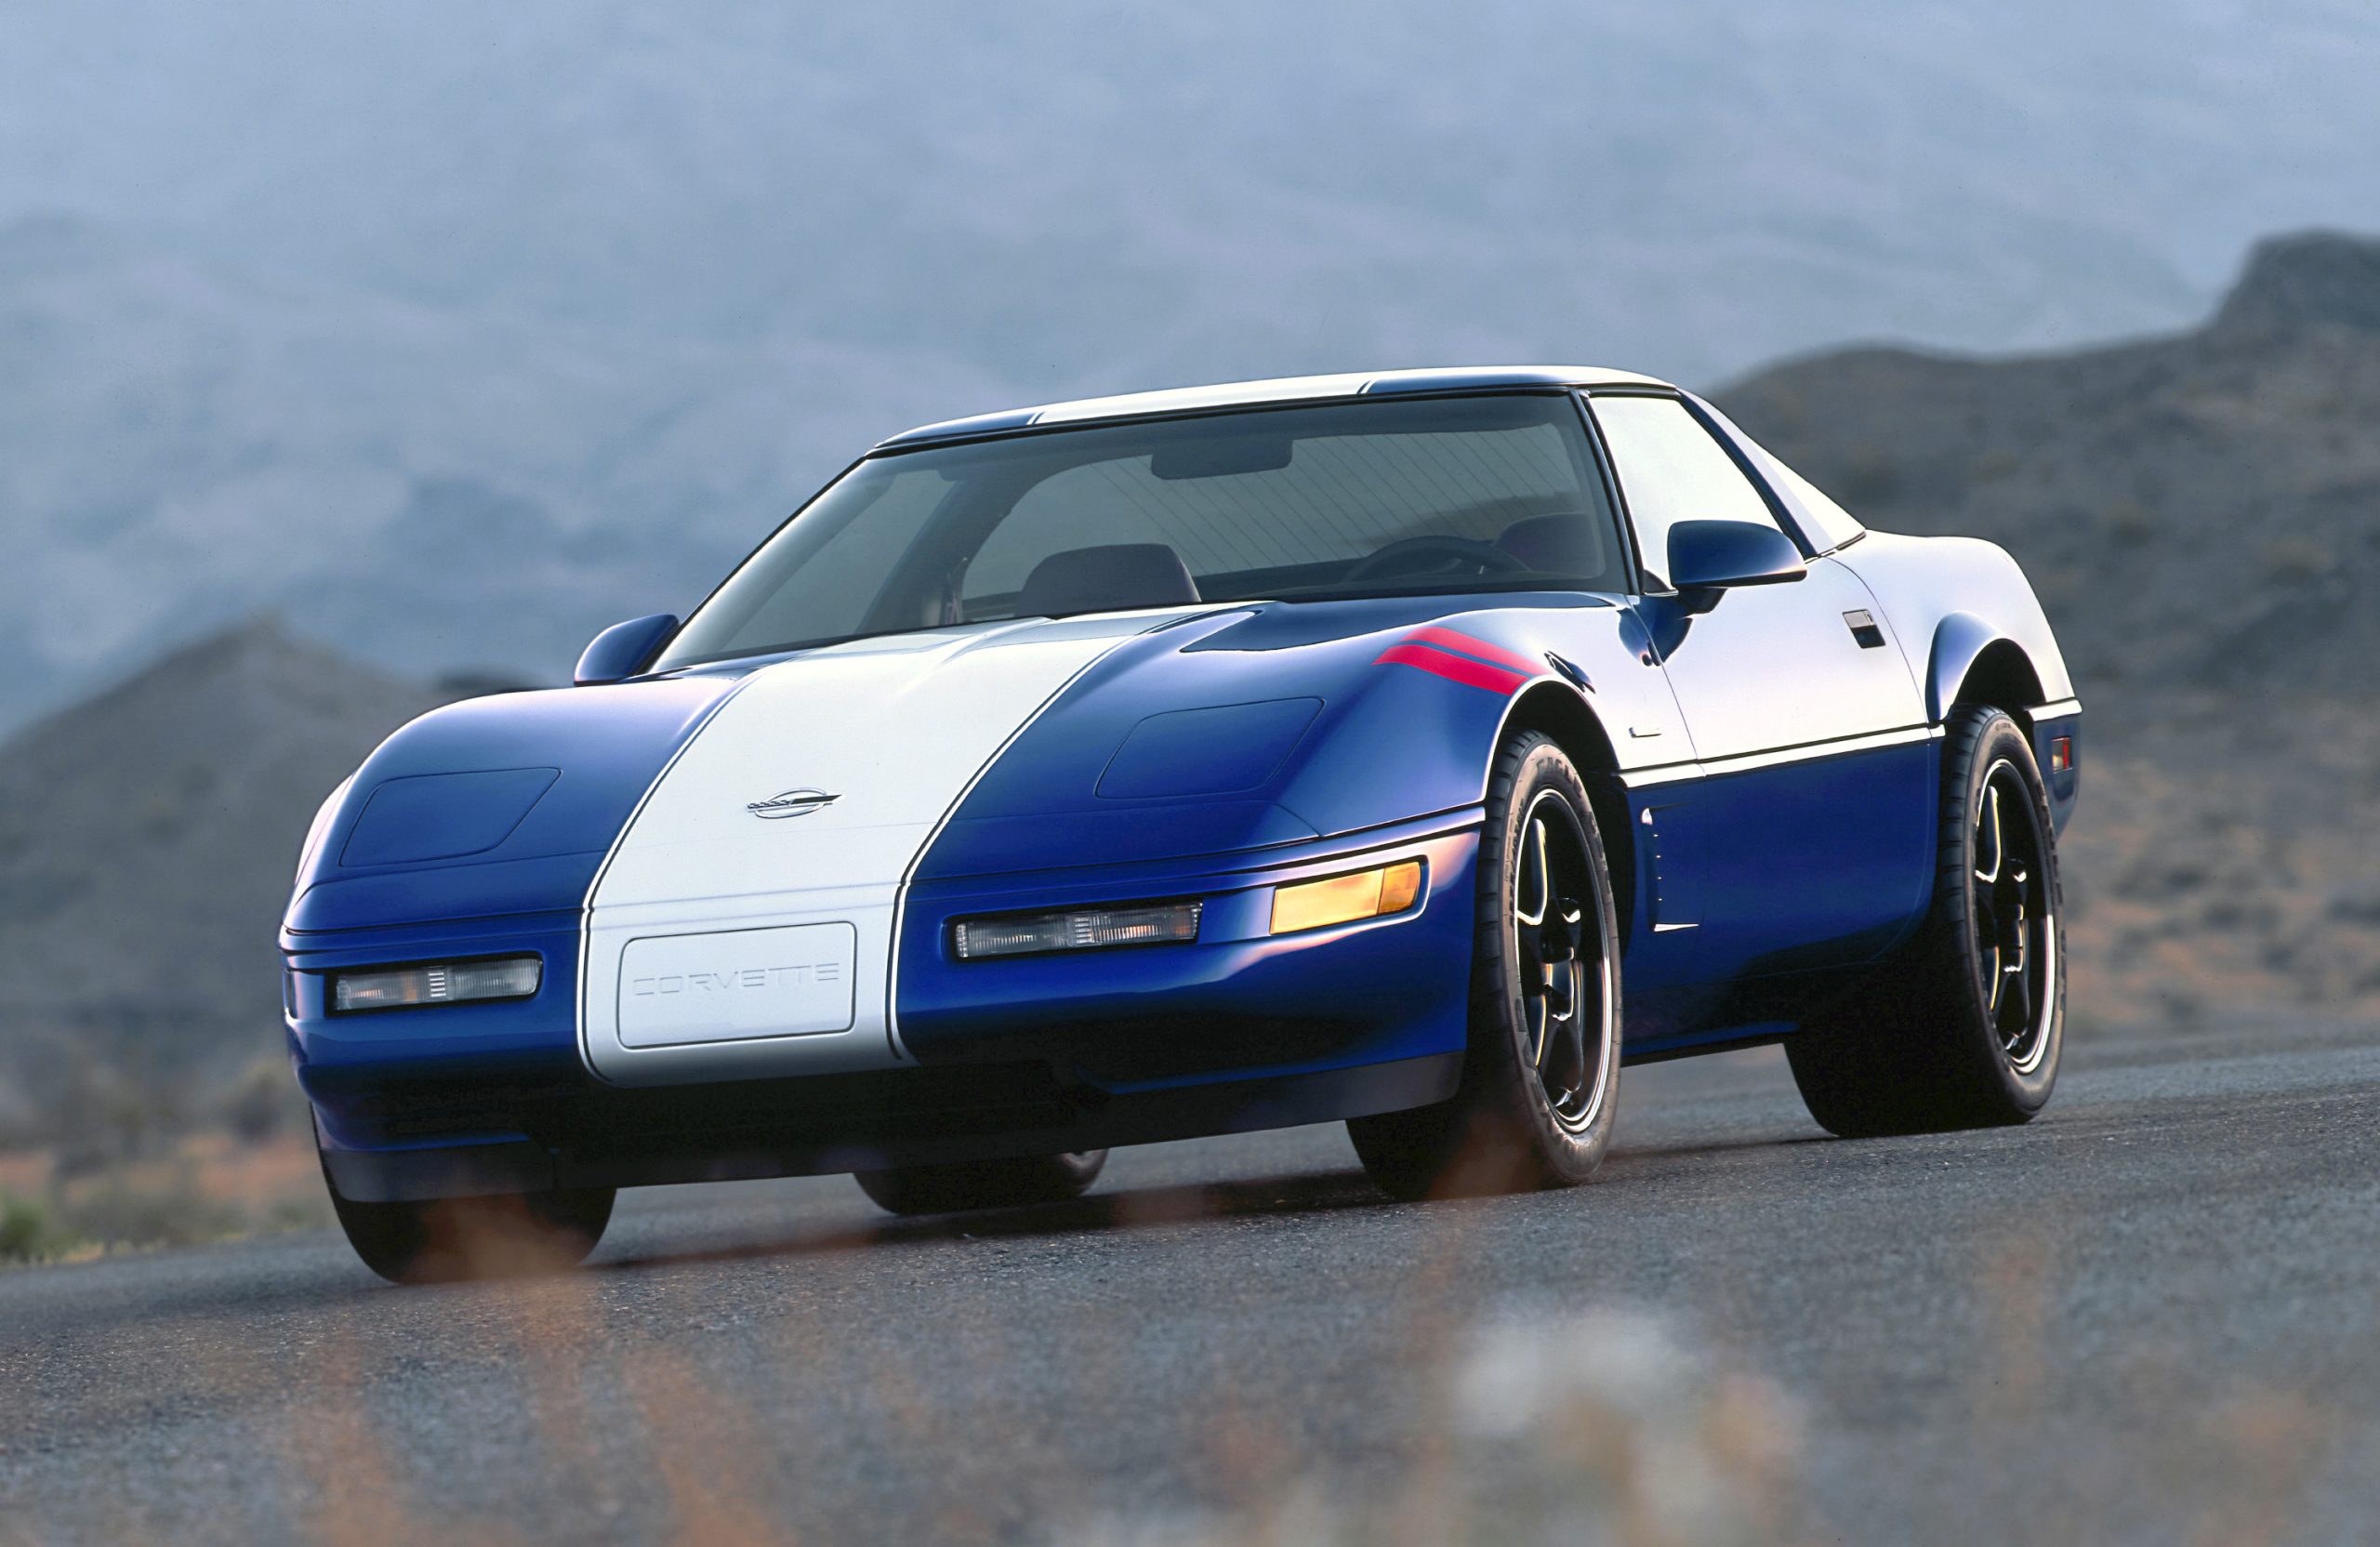 A blue and white-striped Chevy Corvette C4 Grand Sport shot from the front 3/4 angle